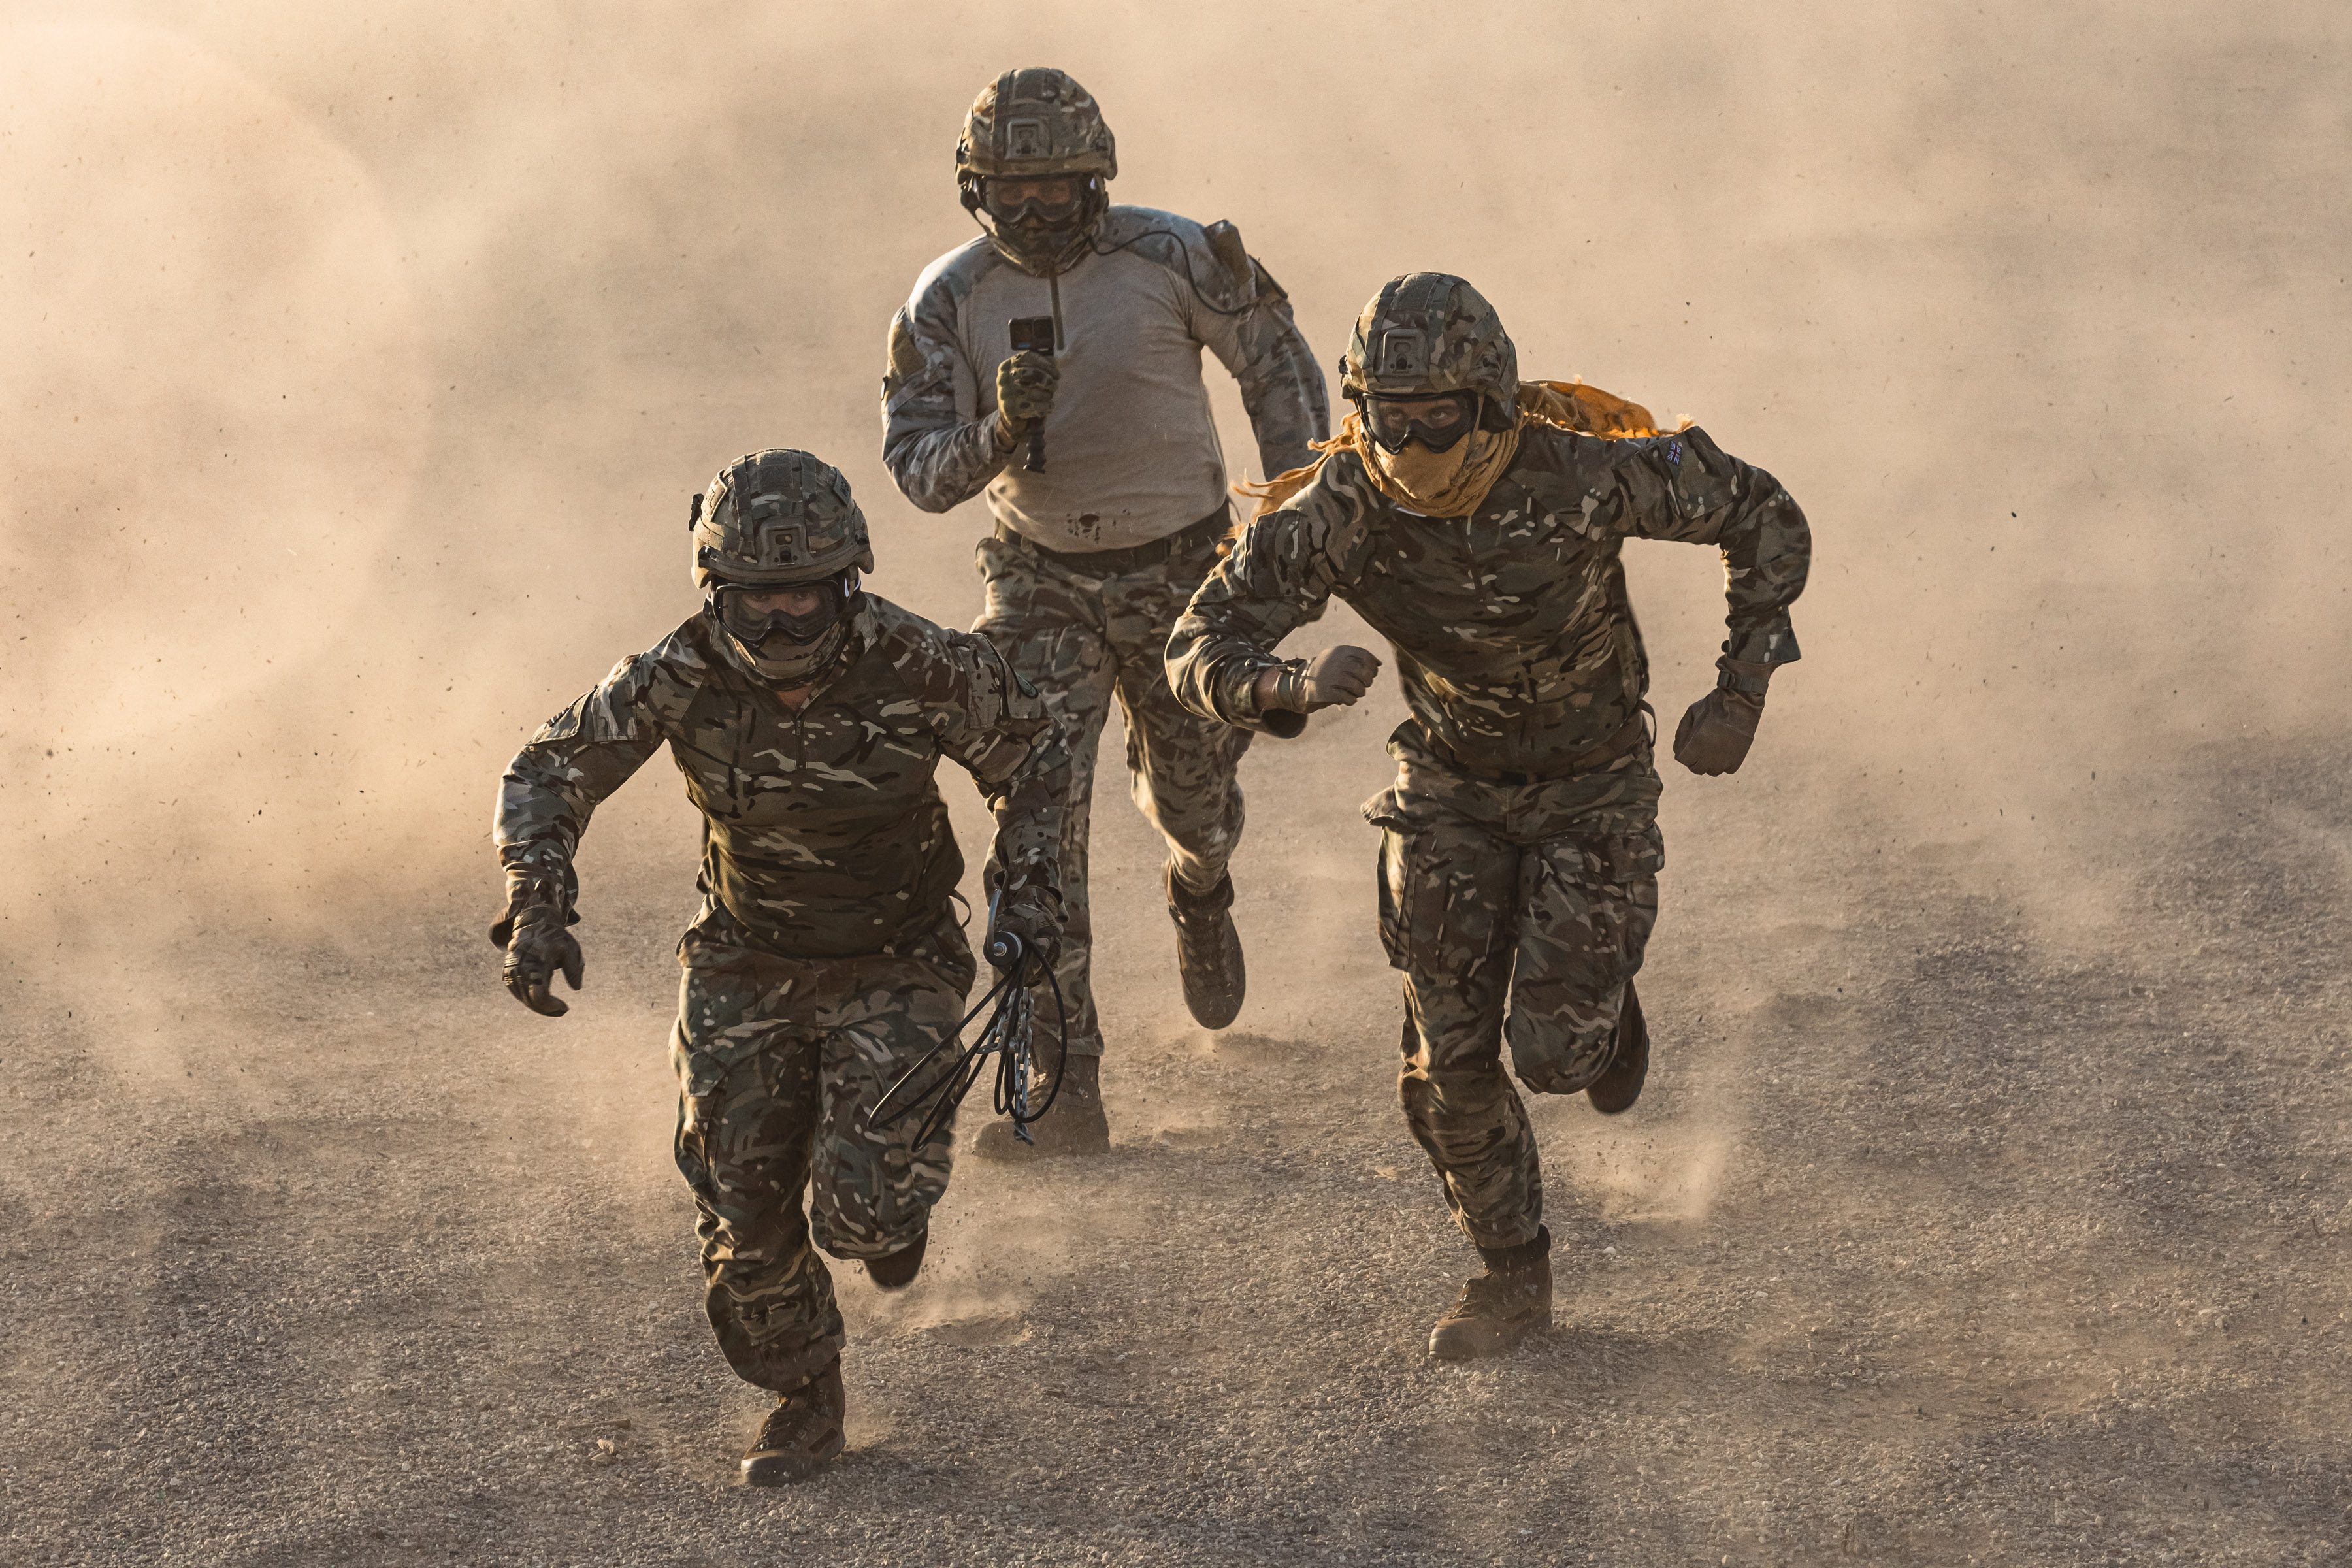 3 Military personnel running across the desert surrounded by dust cloud